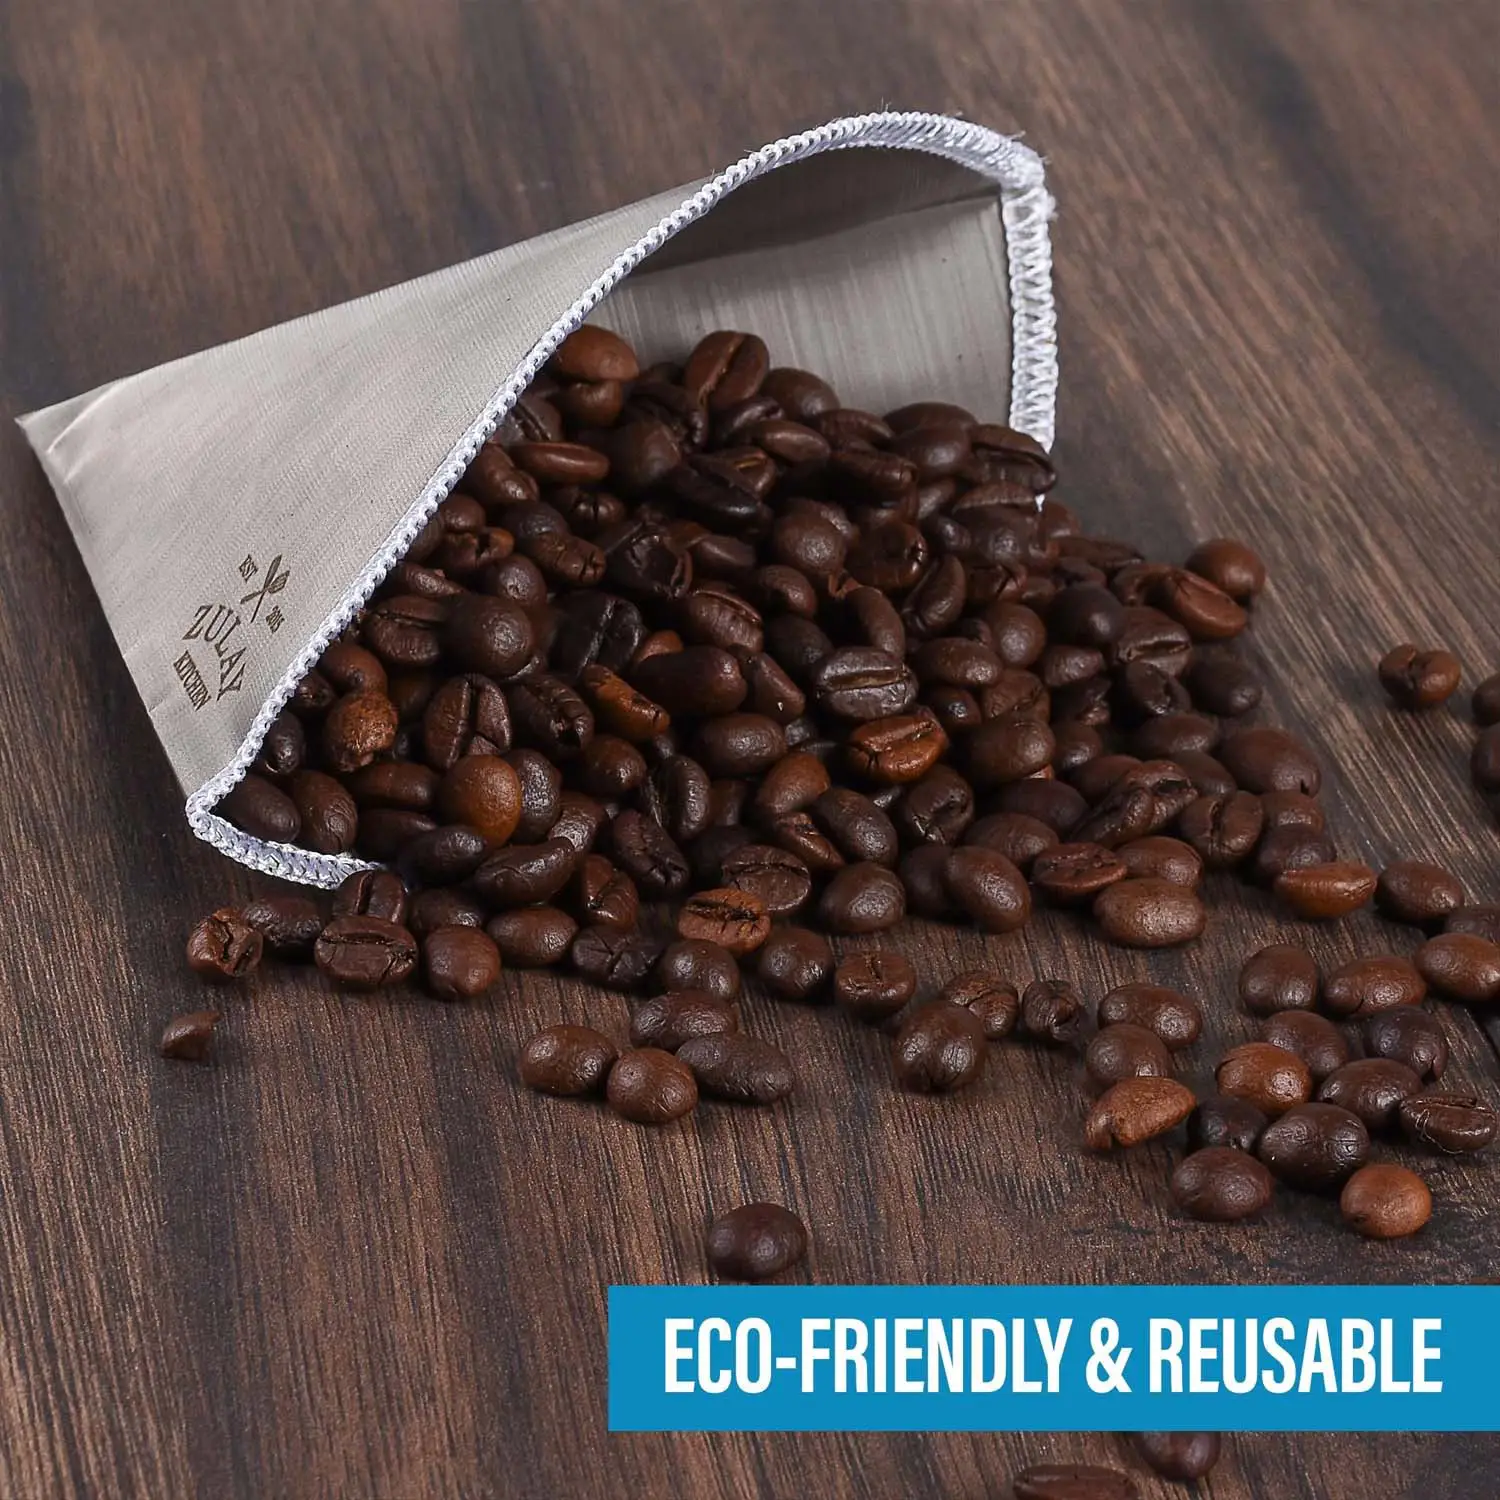 Reusable Pour Over Coffee Filter - Flexible Stainless Steel Mesh